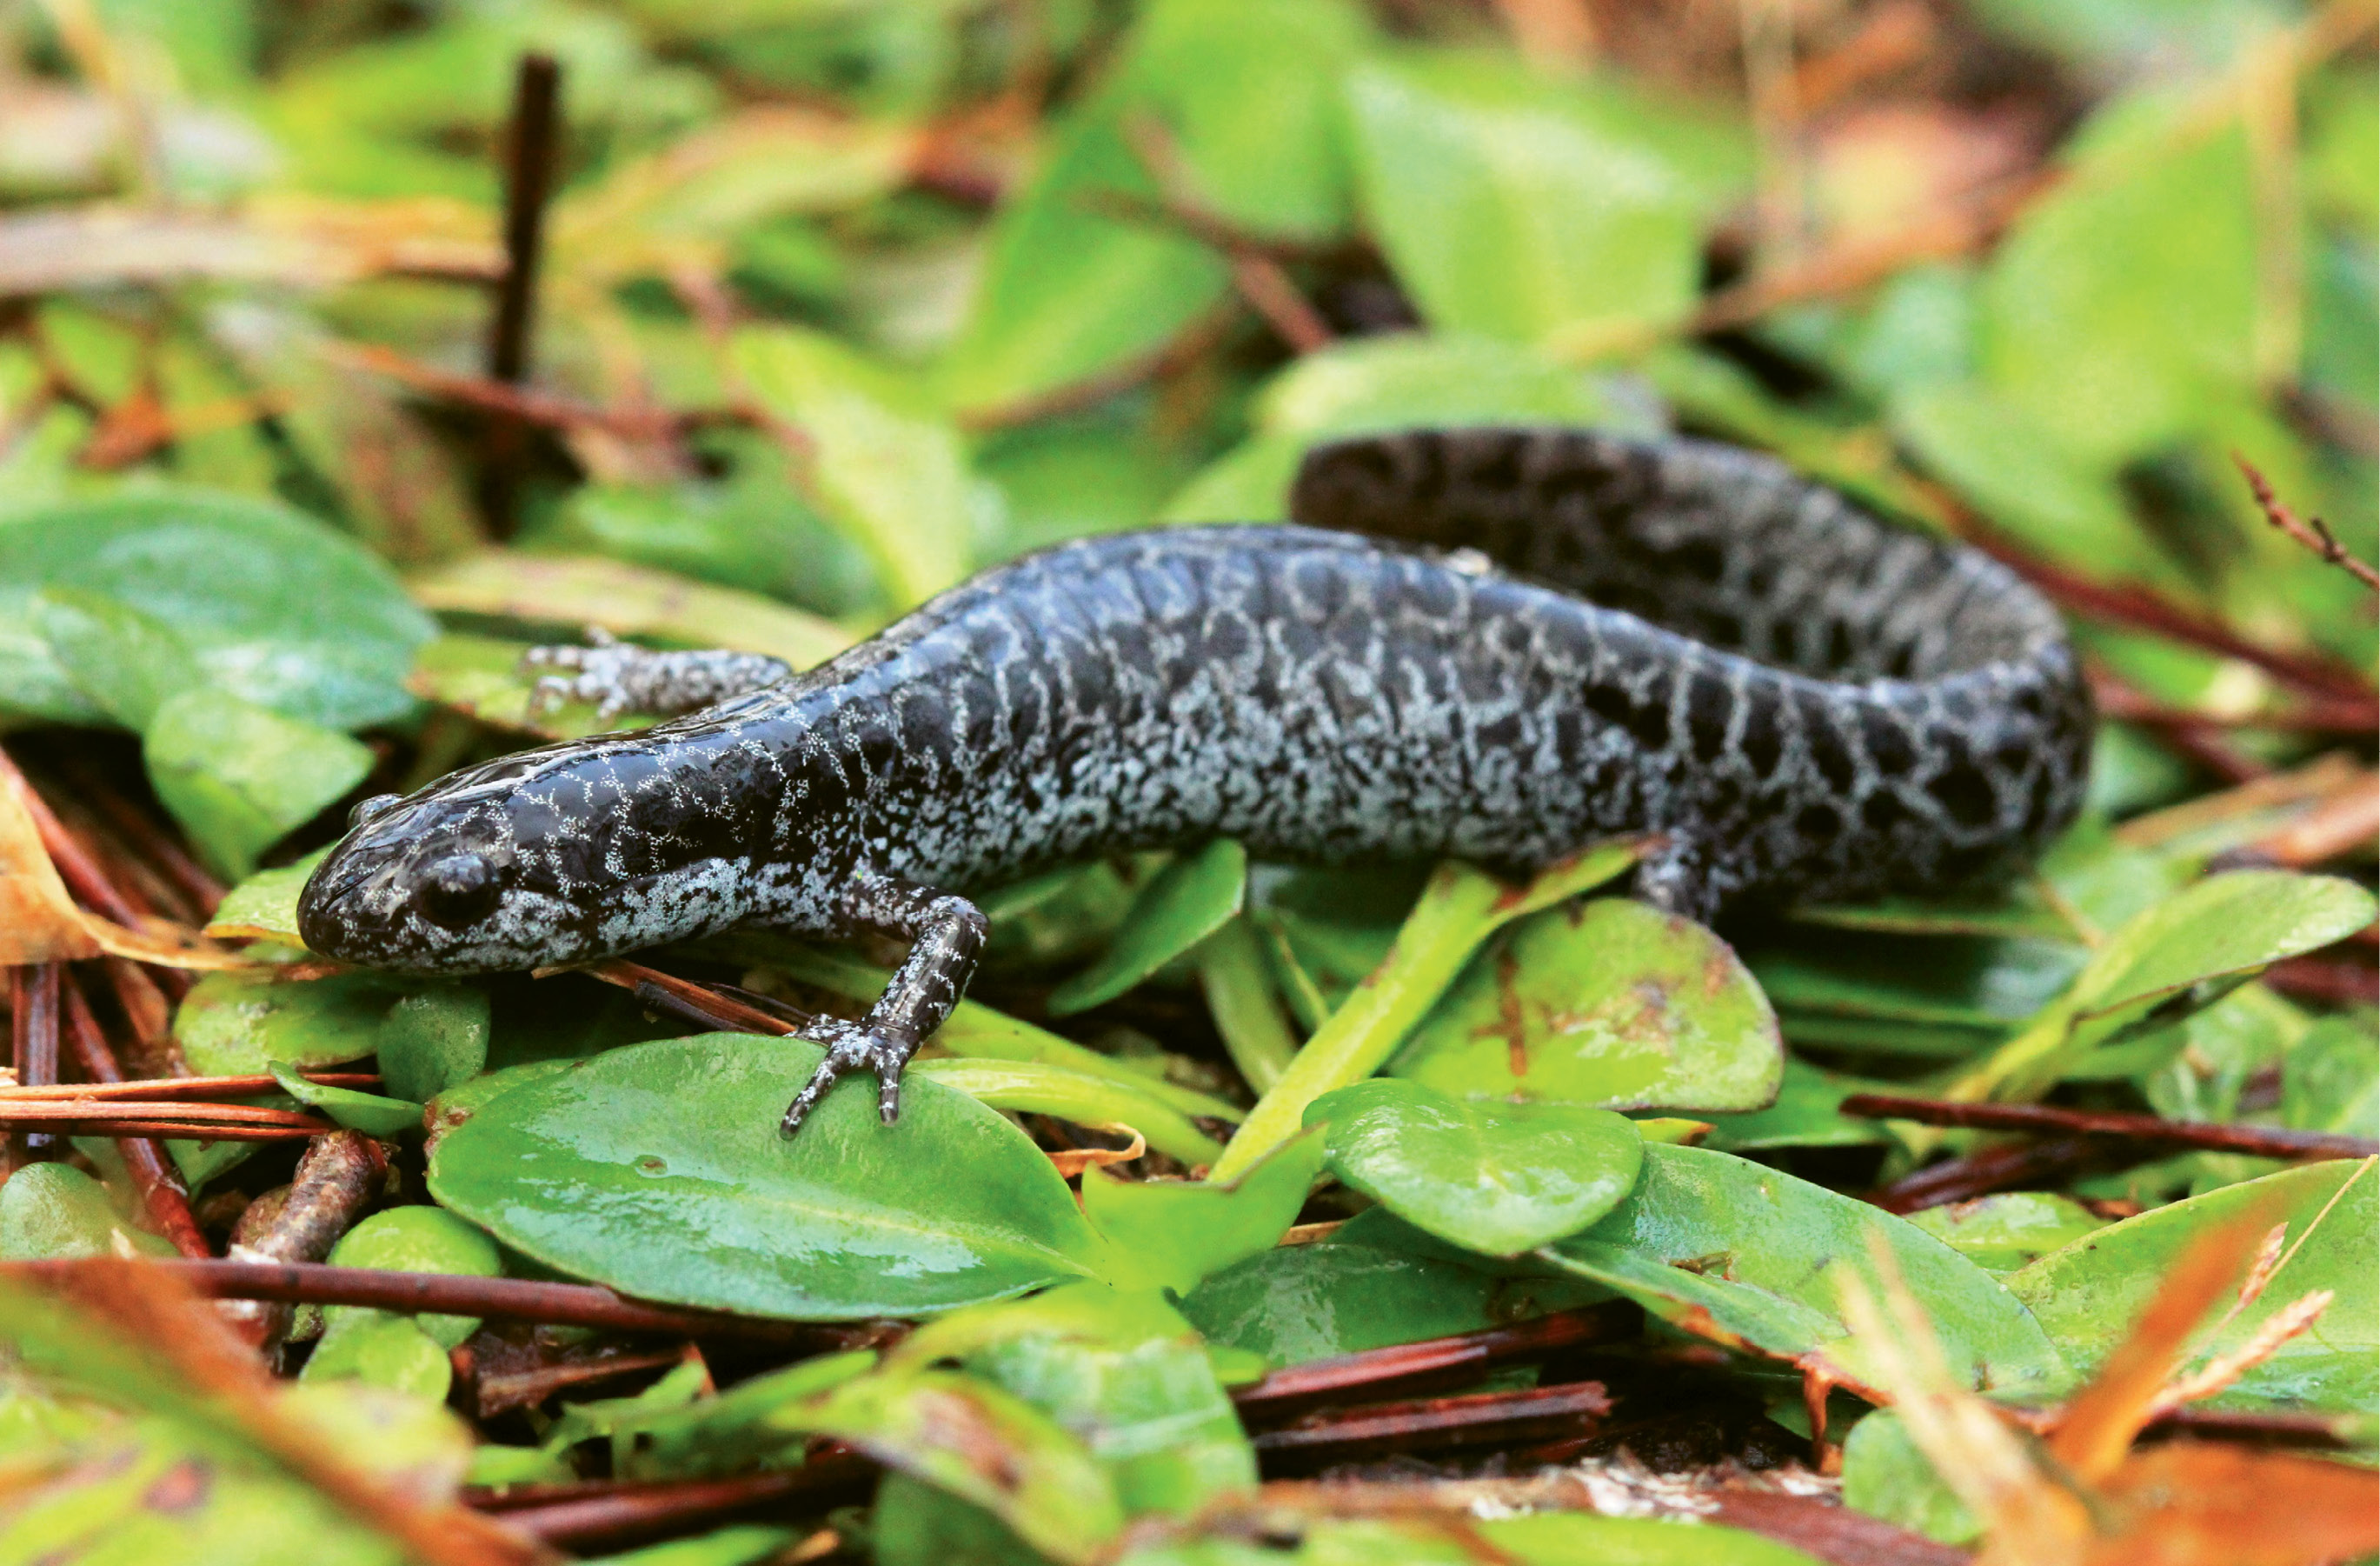 Frosted Flatwoods Salamander (Ambystoma cingulatum) - Destruction of habitat due to logging and development is the primary threat to these endangered amphibians.